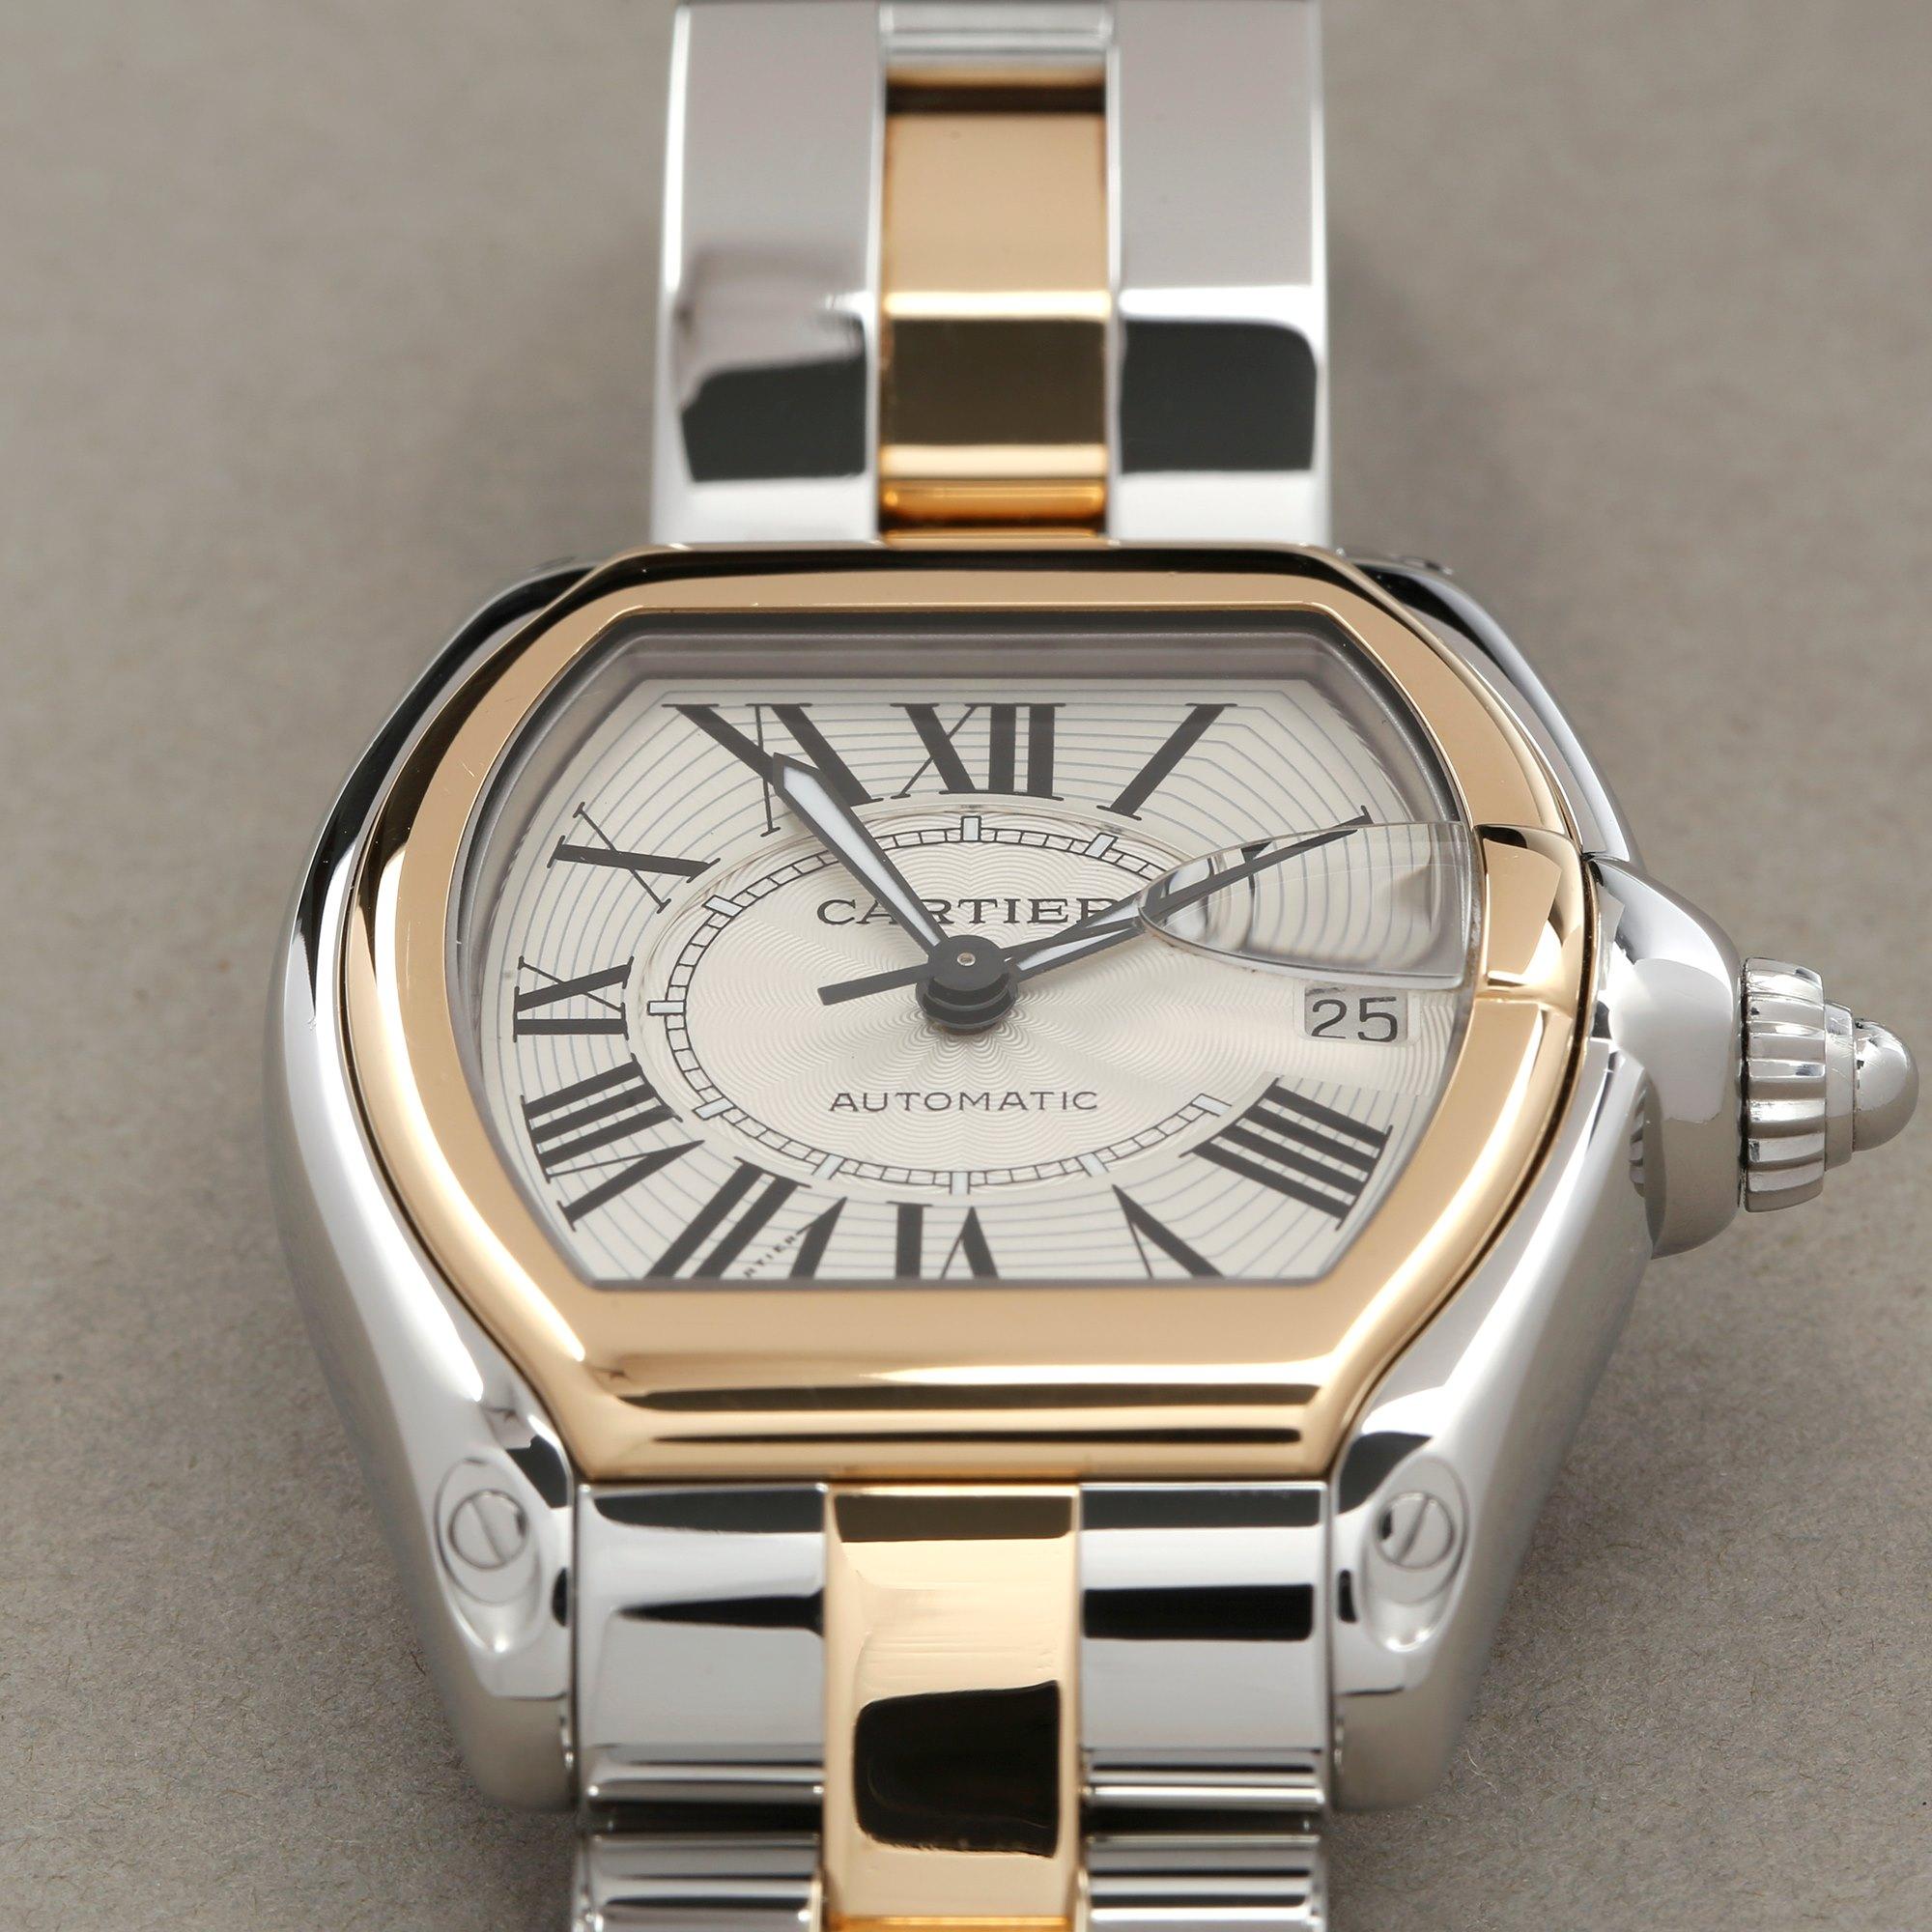 Cartier Roadste 2510 Men’s Stainless Steel and Yellow Gold Large Automatic Watch 2